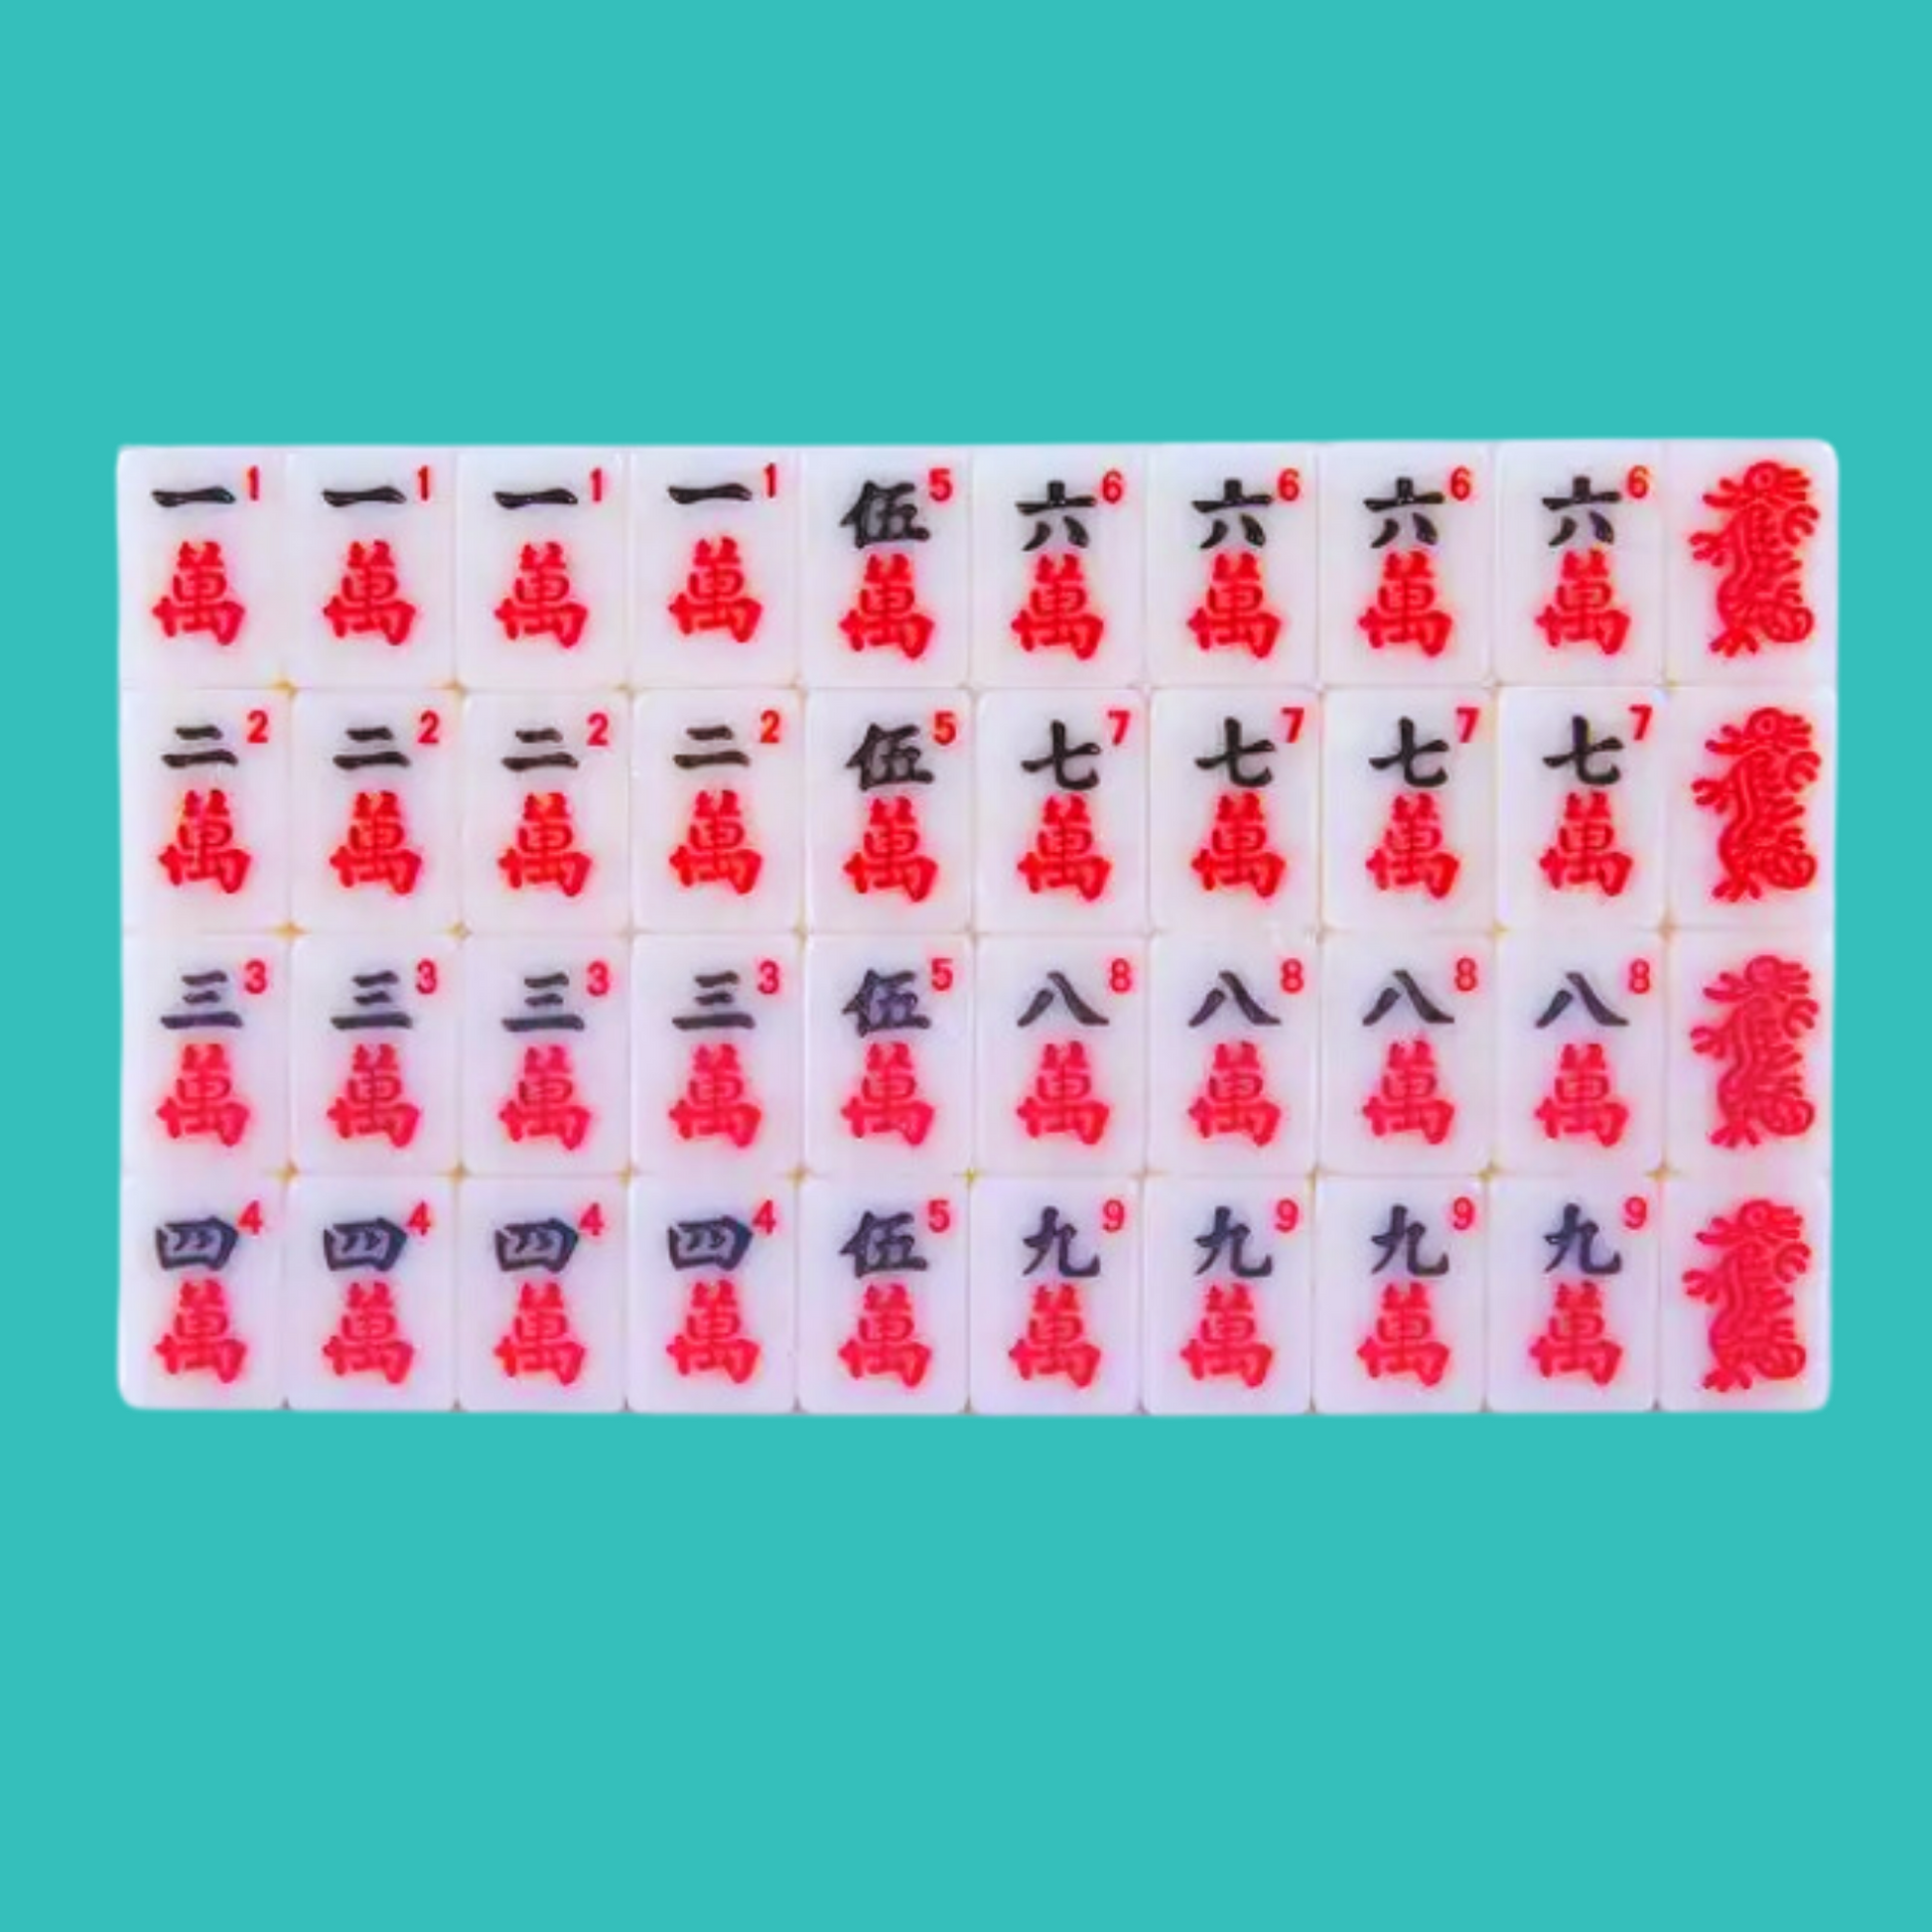 Mahjong Traditional Mini American Series Travel American Mahjongg Tile Set of 166 melamine white tiles, bright pink and teal bag, custom instruction and tips card, 2 colorful dice- crack crak red dragon tiles